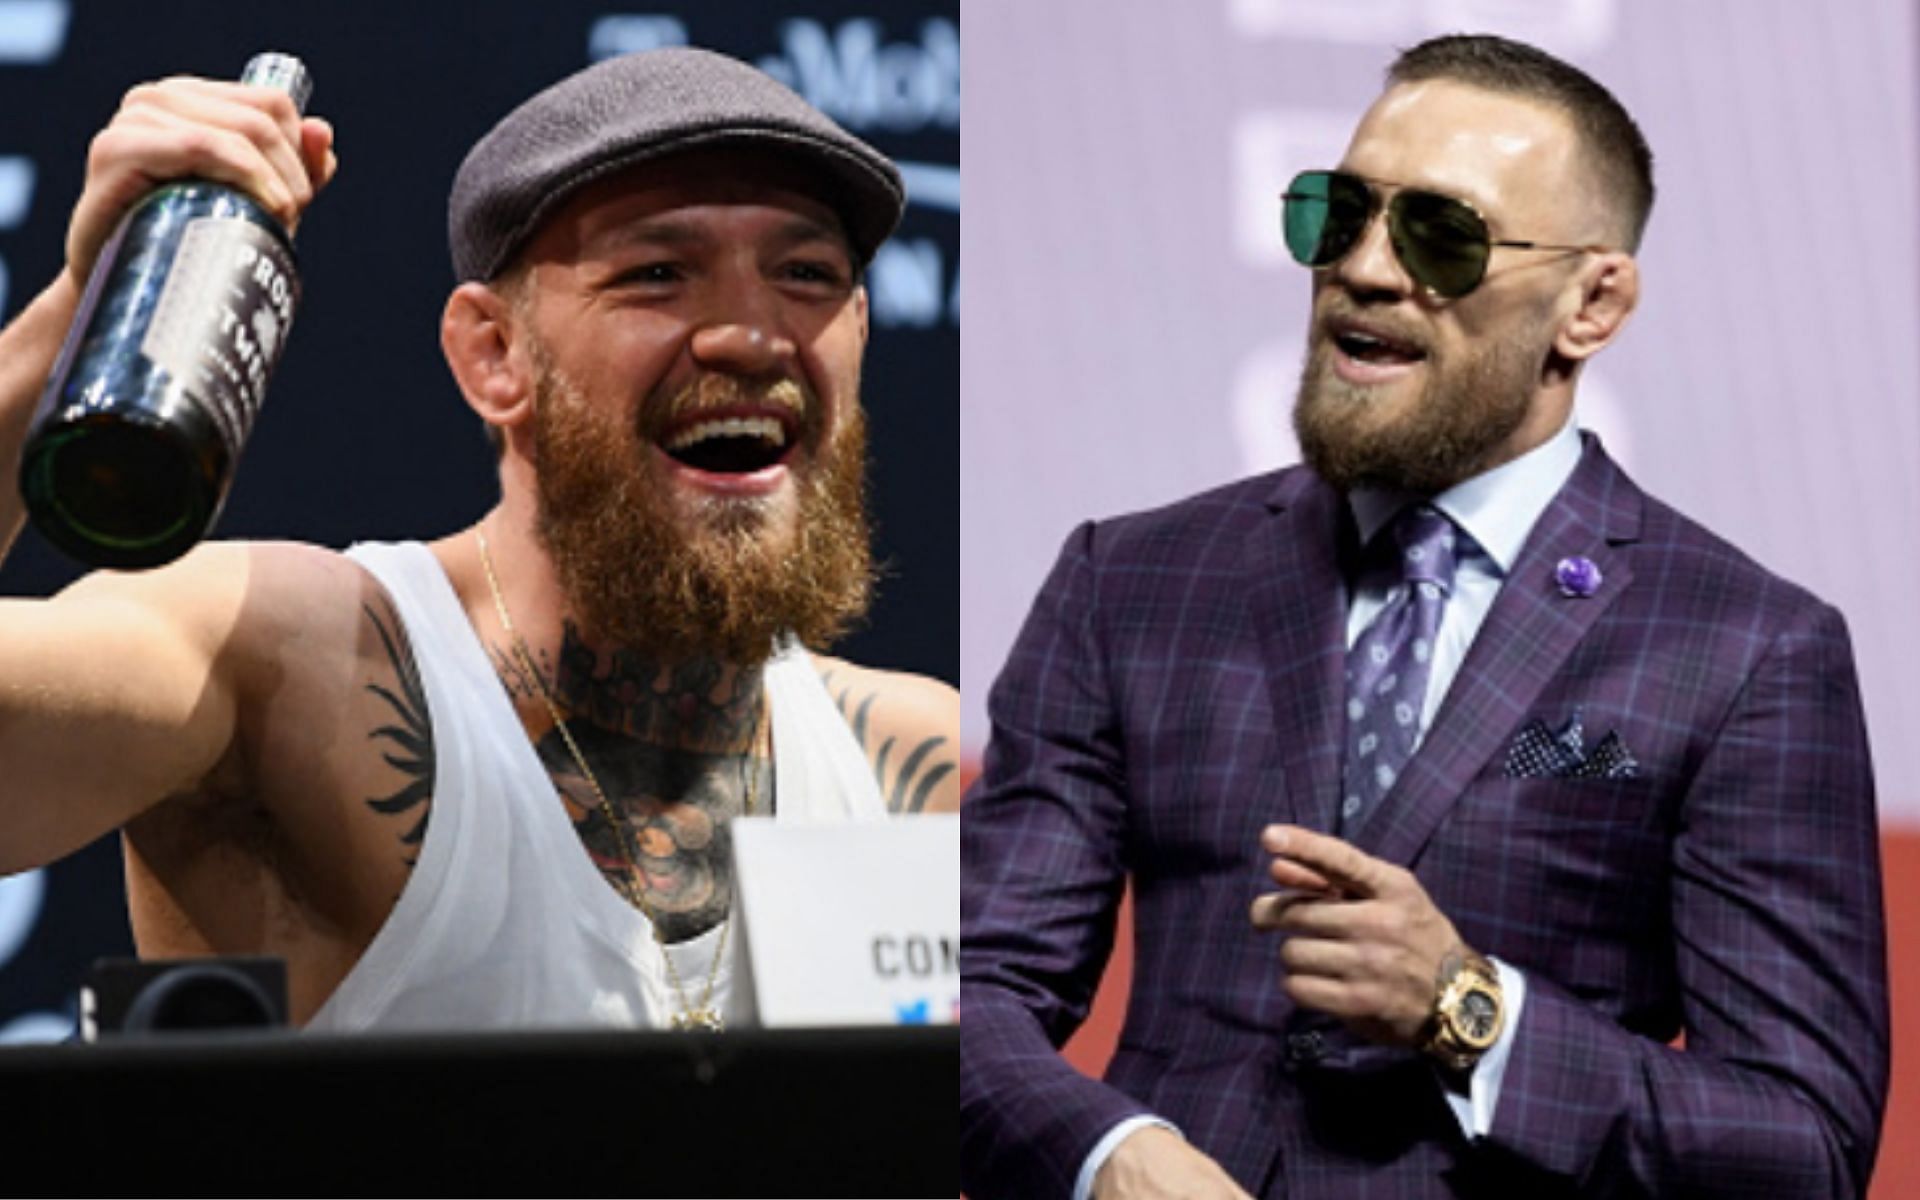 Conor McGregor (left and right) is one of the biggest draws in combat sports history